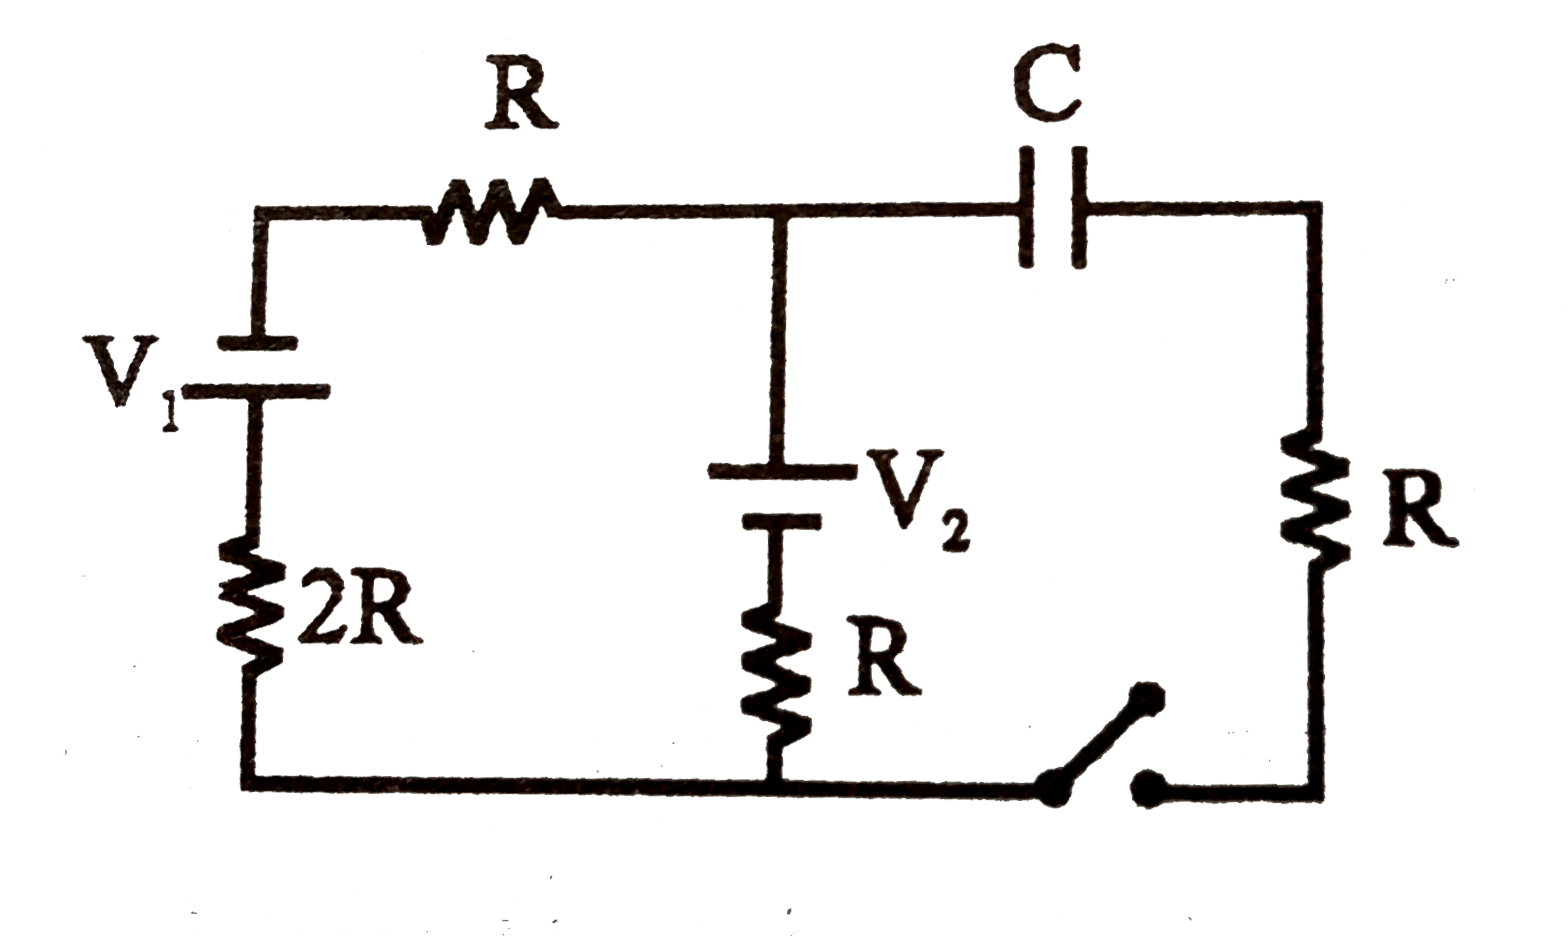 In the transient circuit shown the time constant of the circuit is -